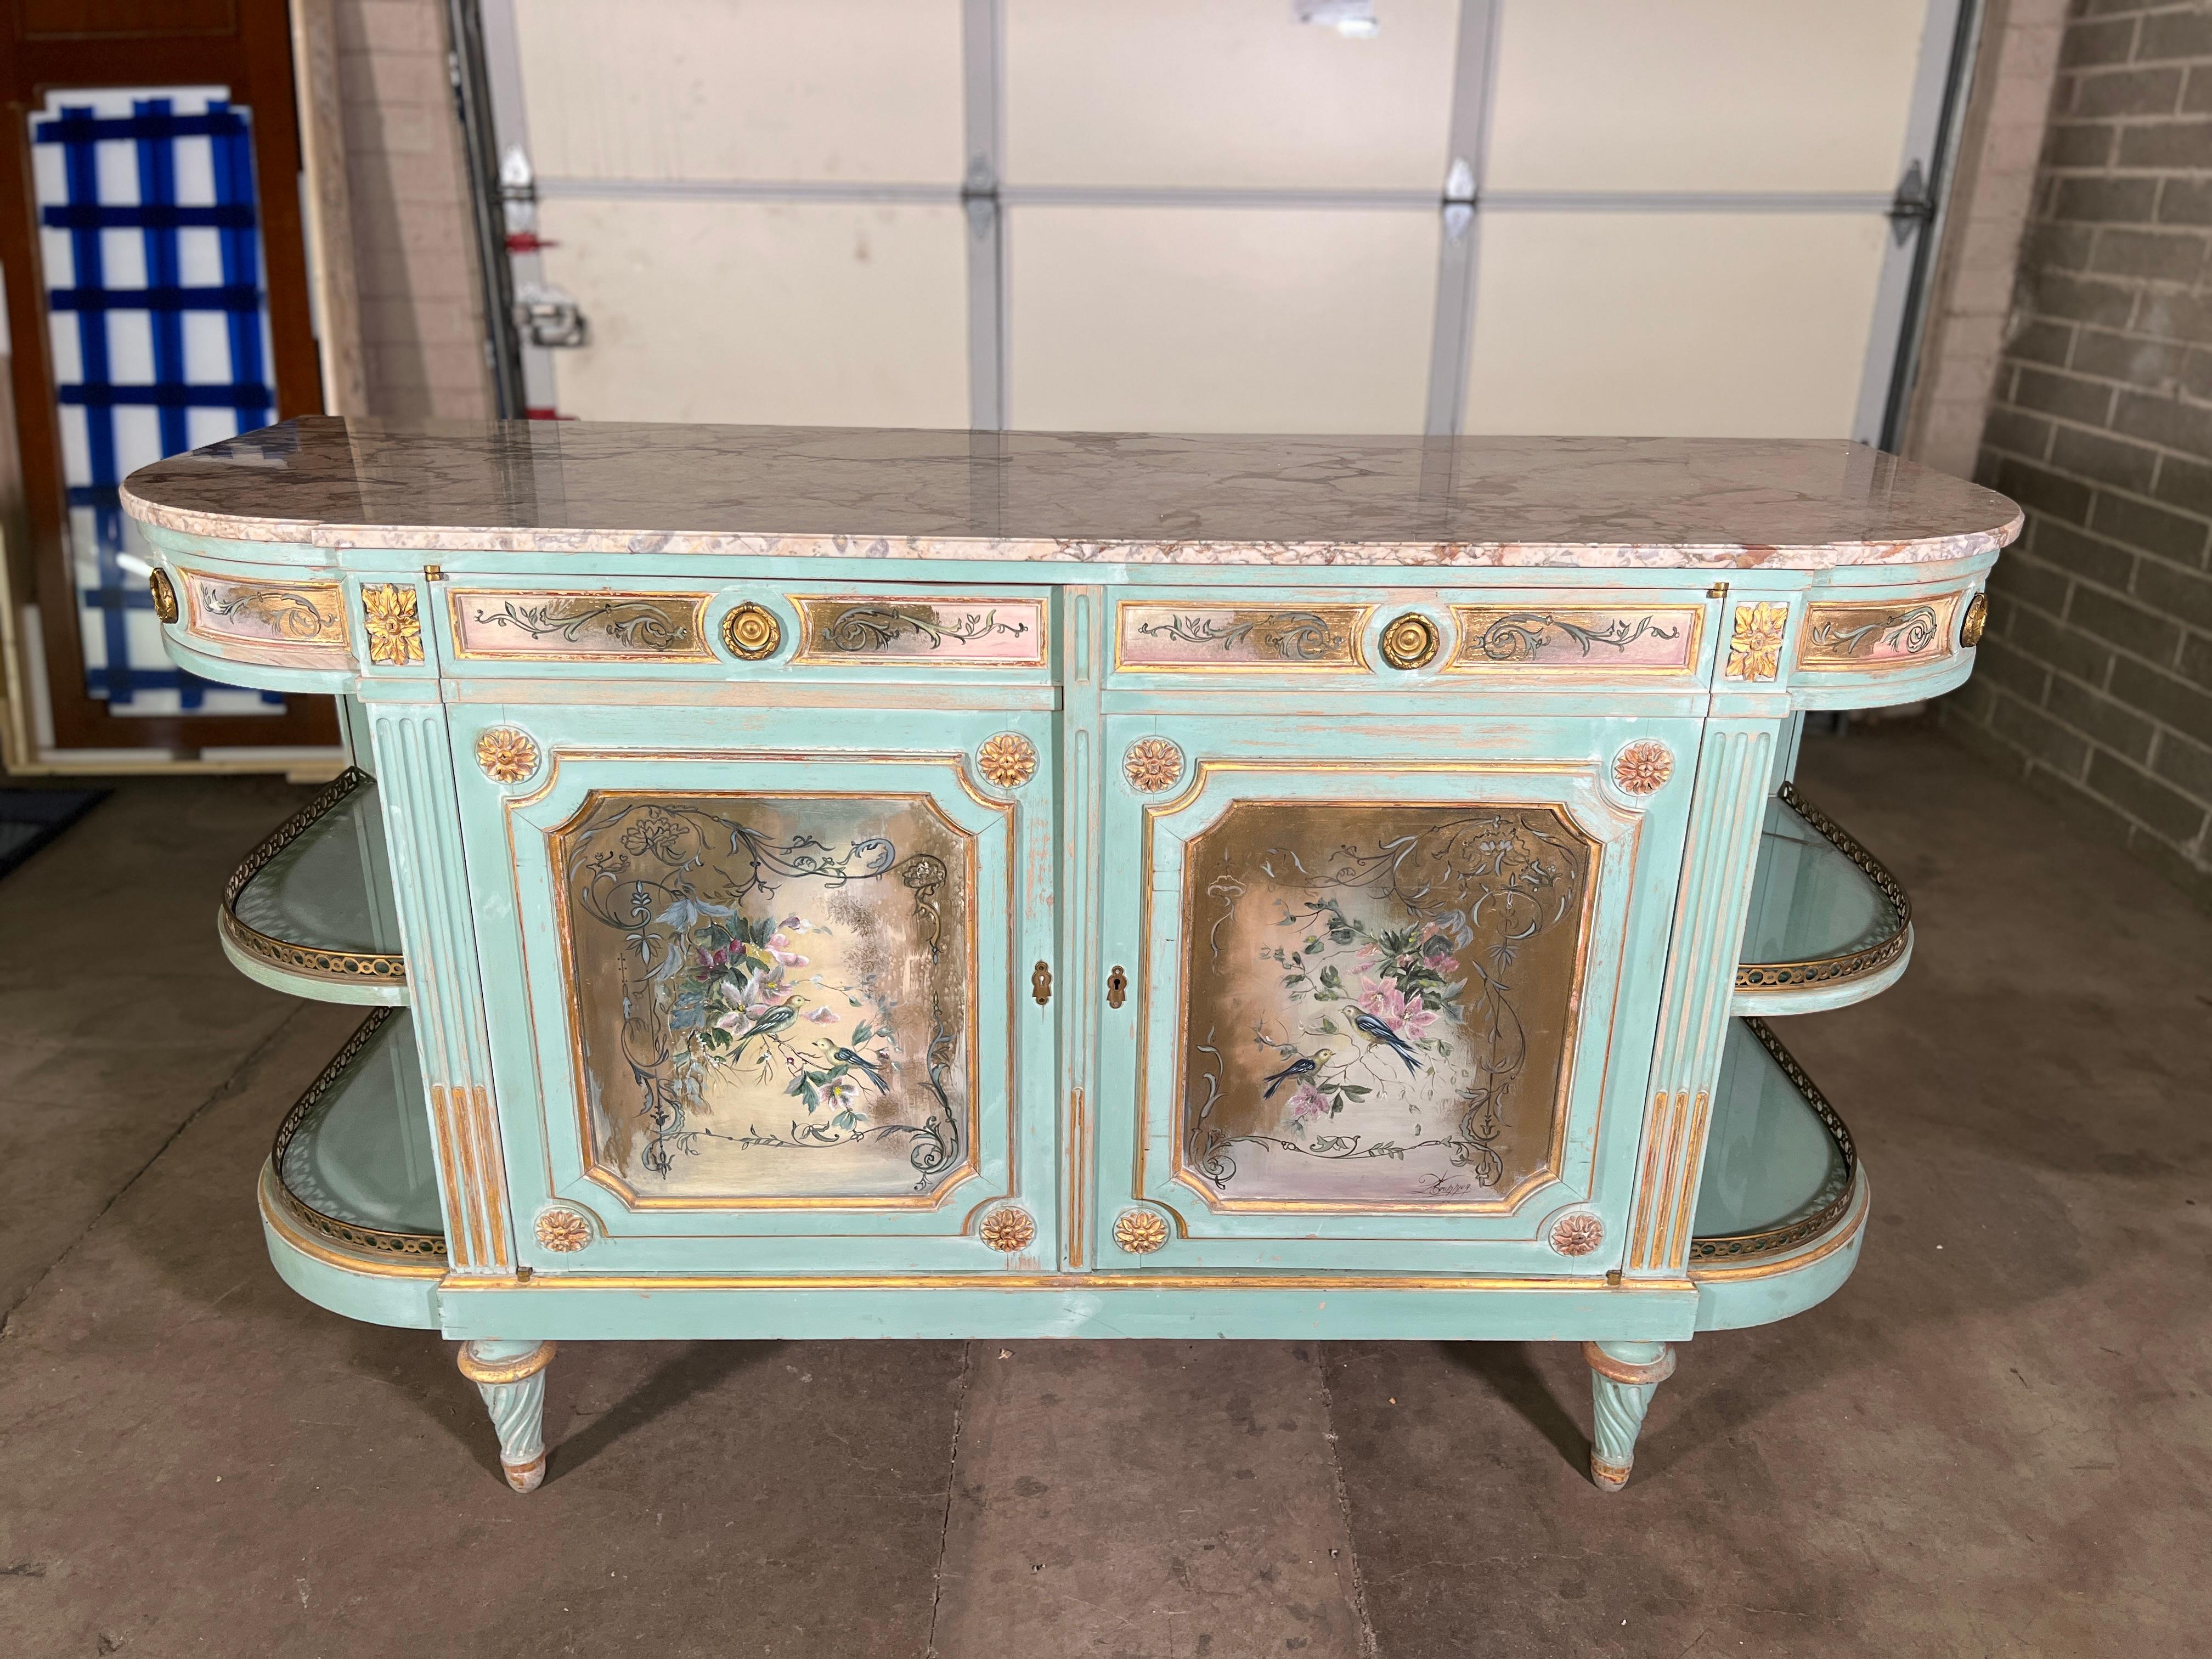 19th Century (Late) Louis XVI Style Painted Sideboard From Soubrier Paris

